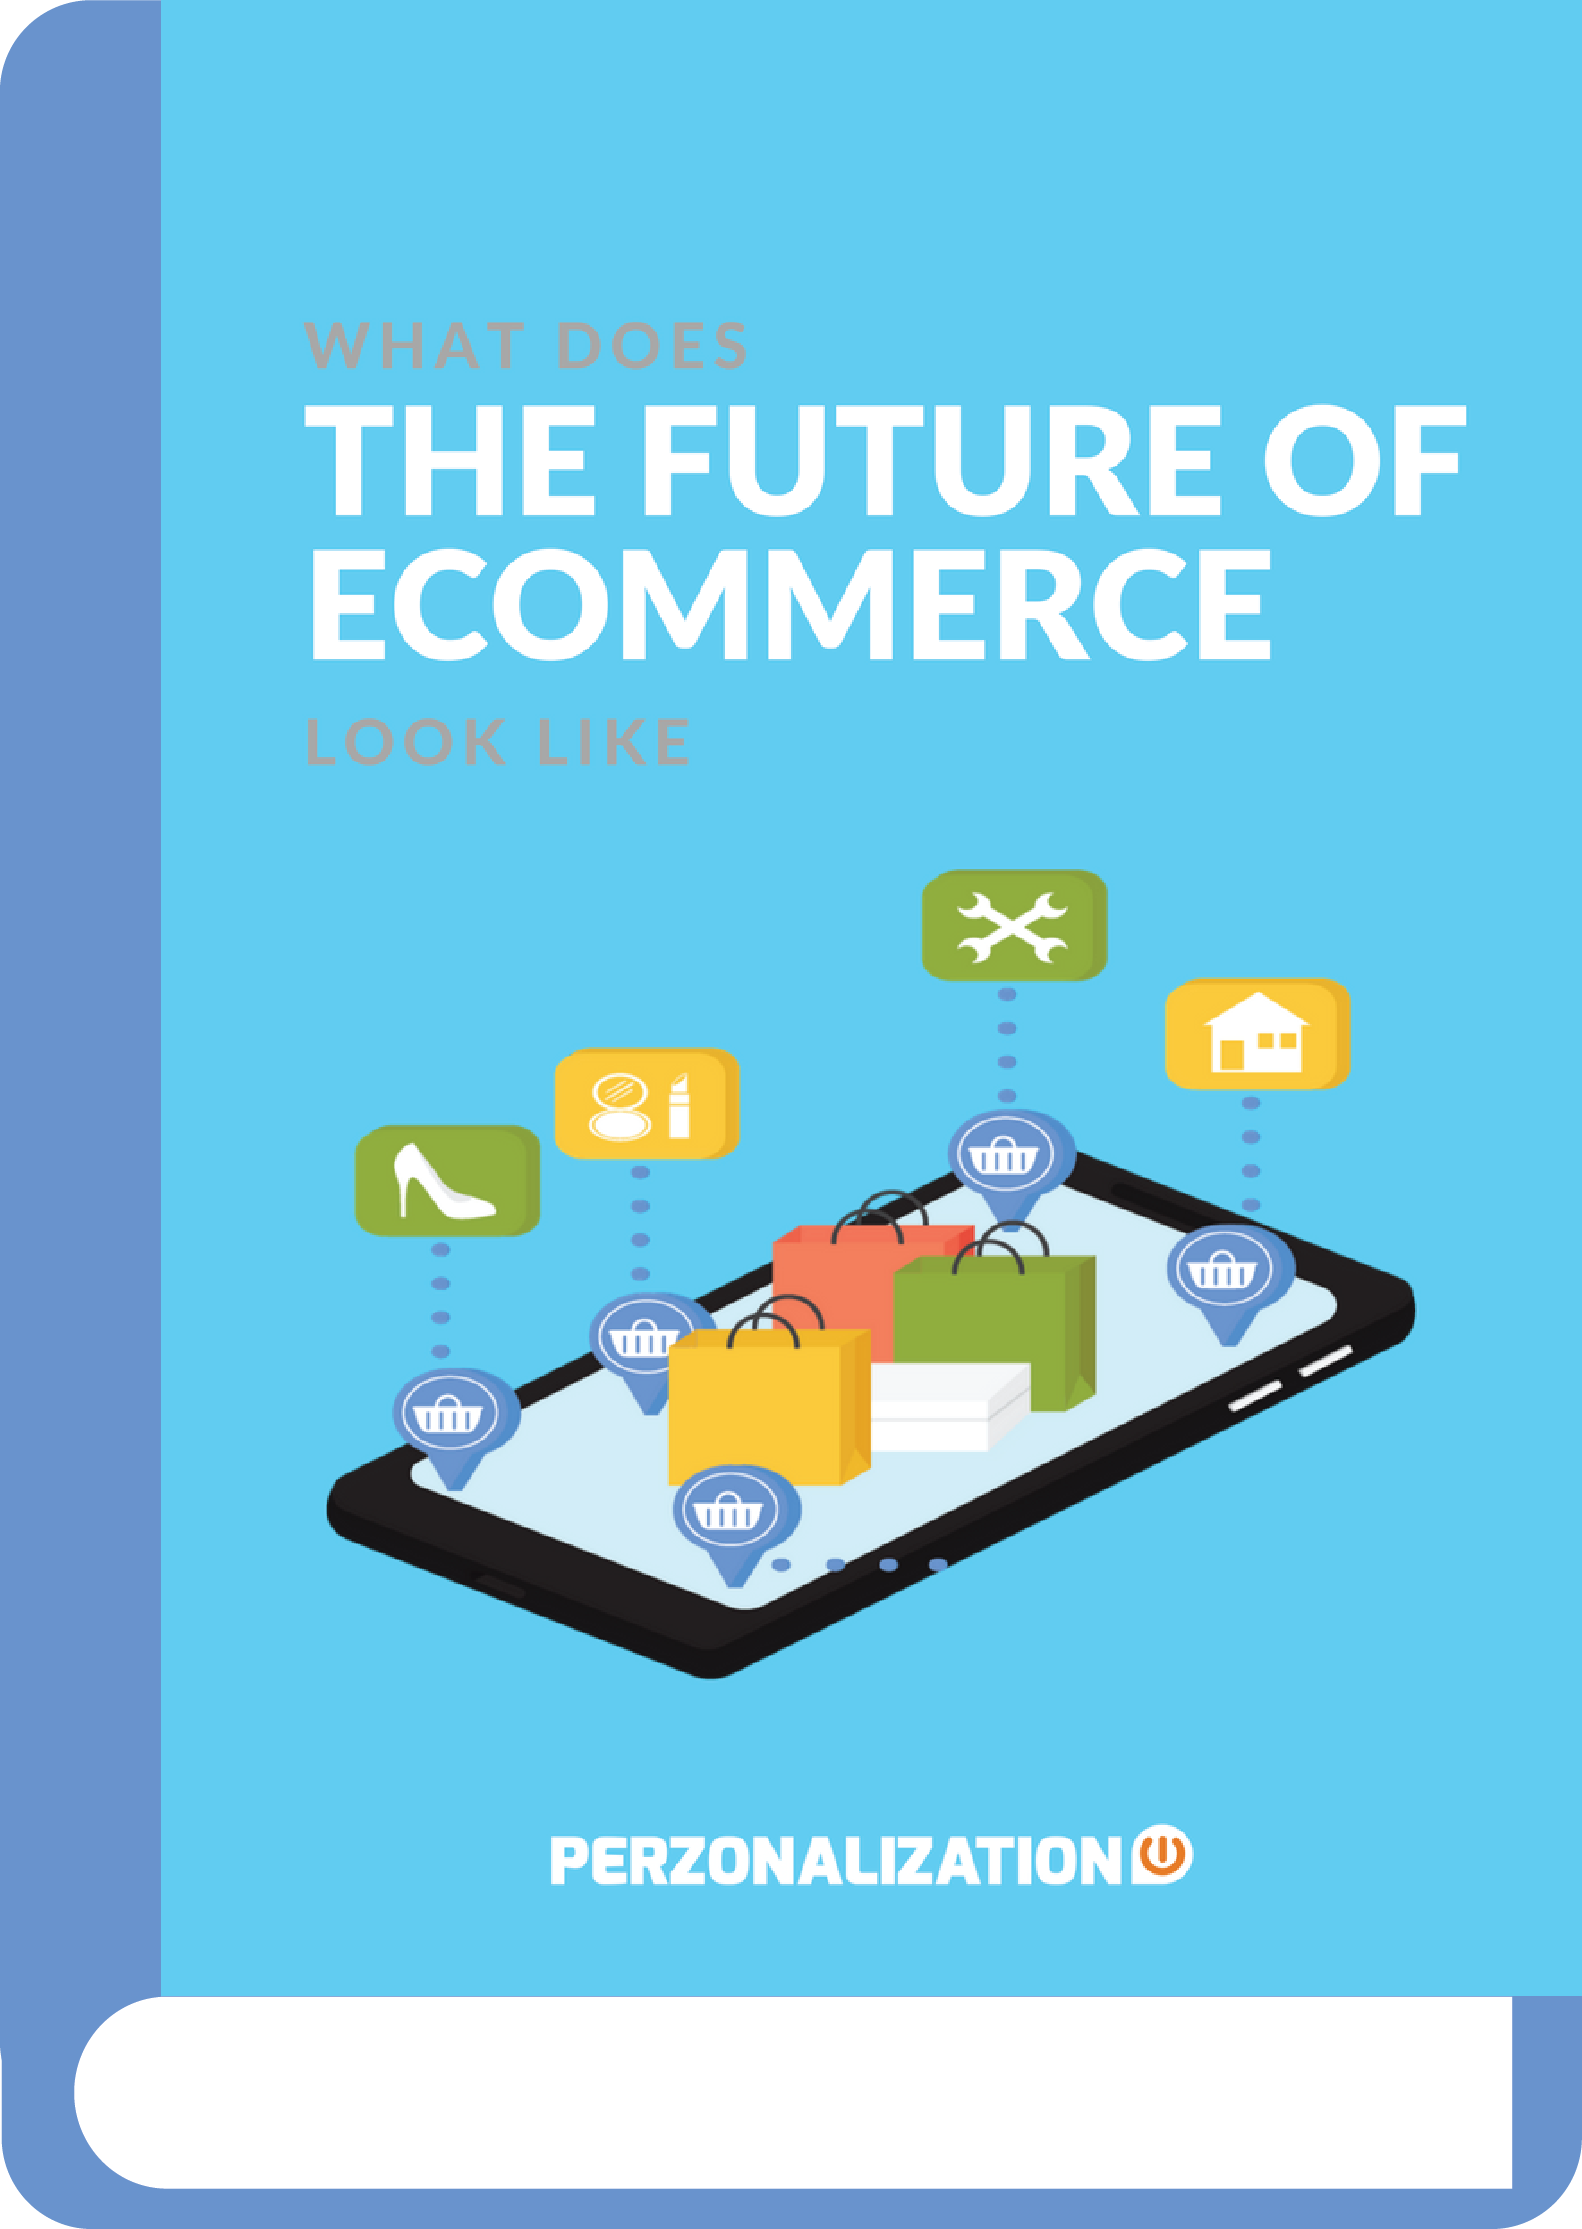 What is the future of eCommerce; or have we reached a point of saturation? The answer is NO. The reason is simple and can be summarized in one argument.